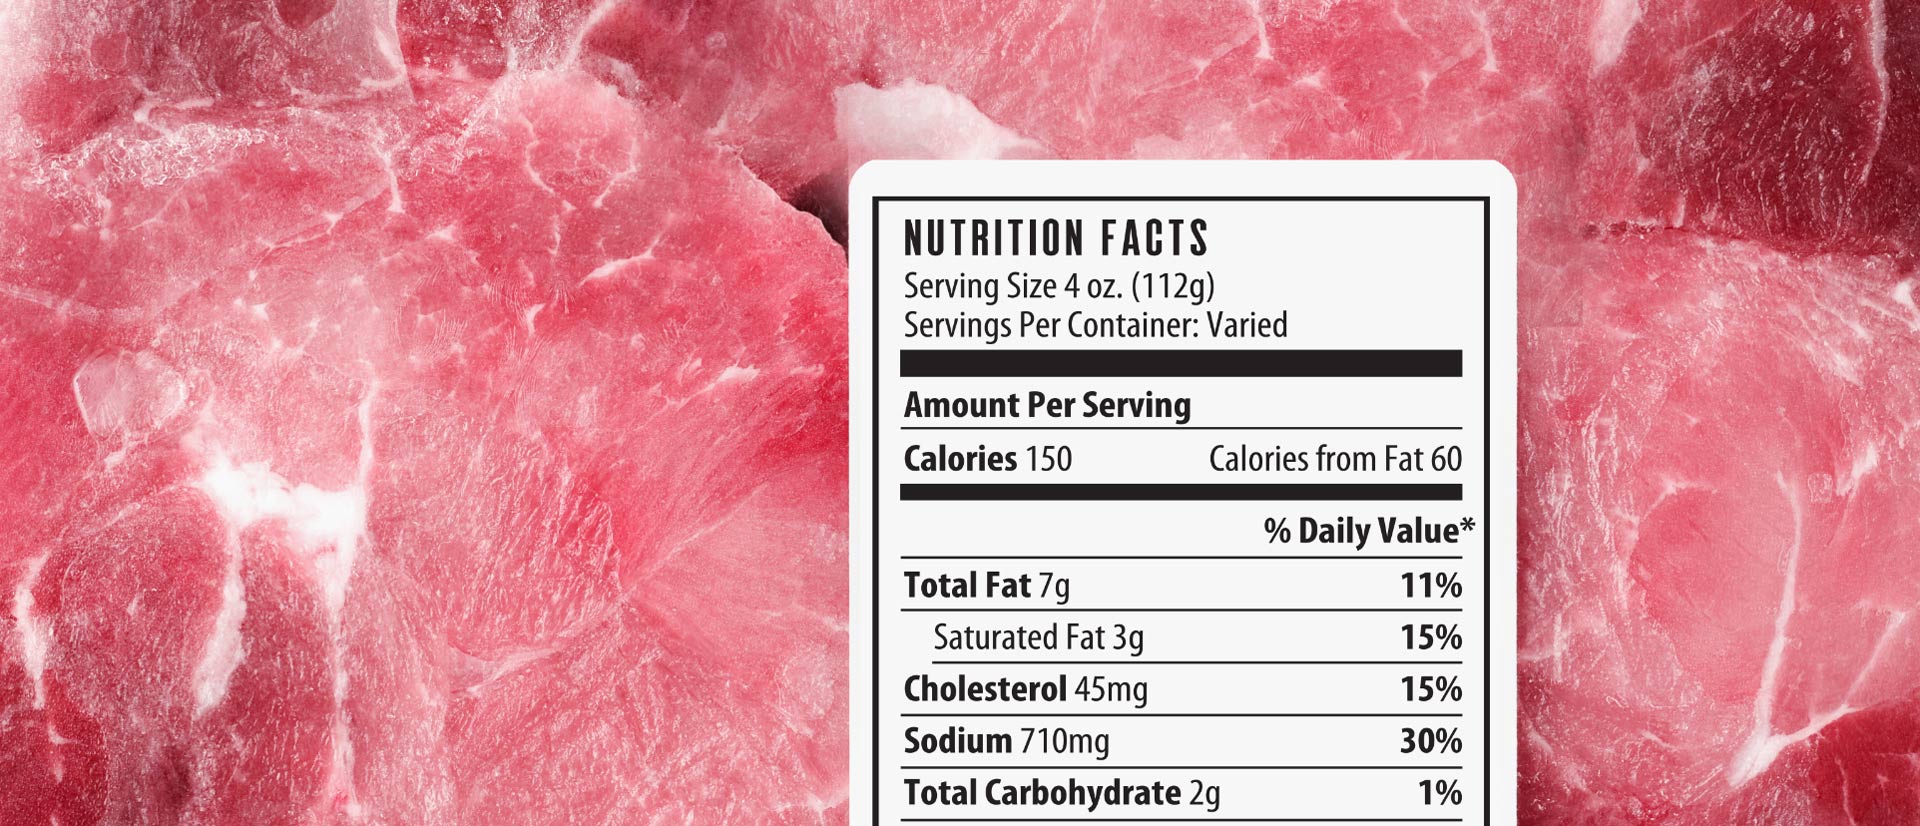 Required meat product nutrition labels sharing product information